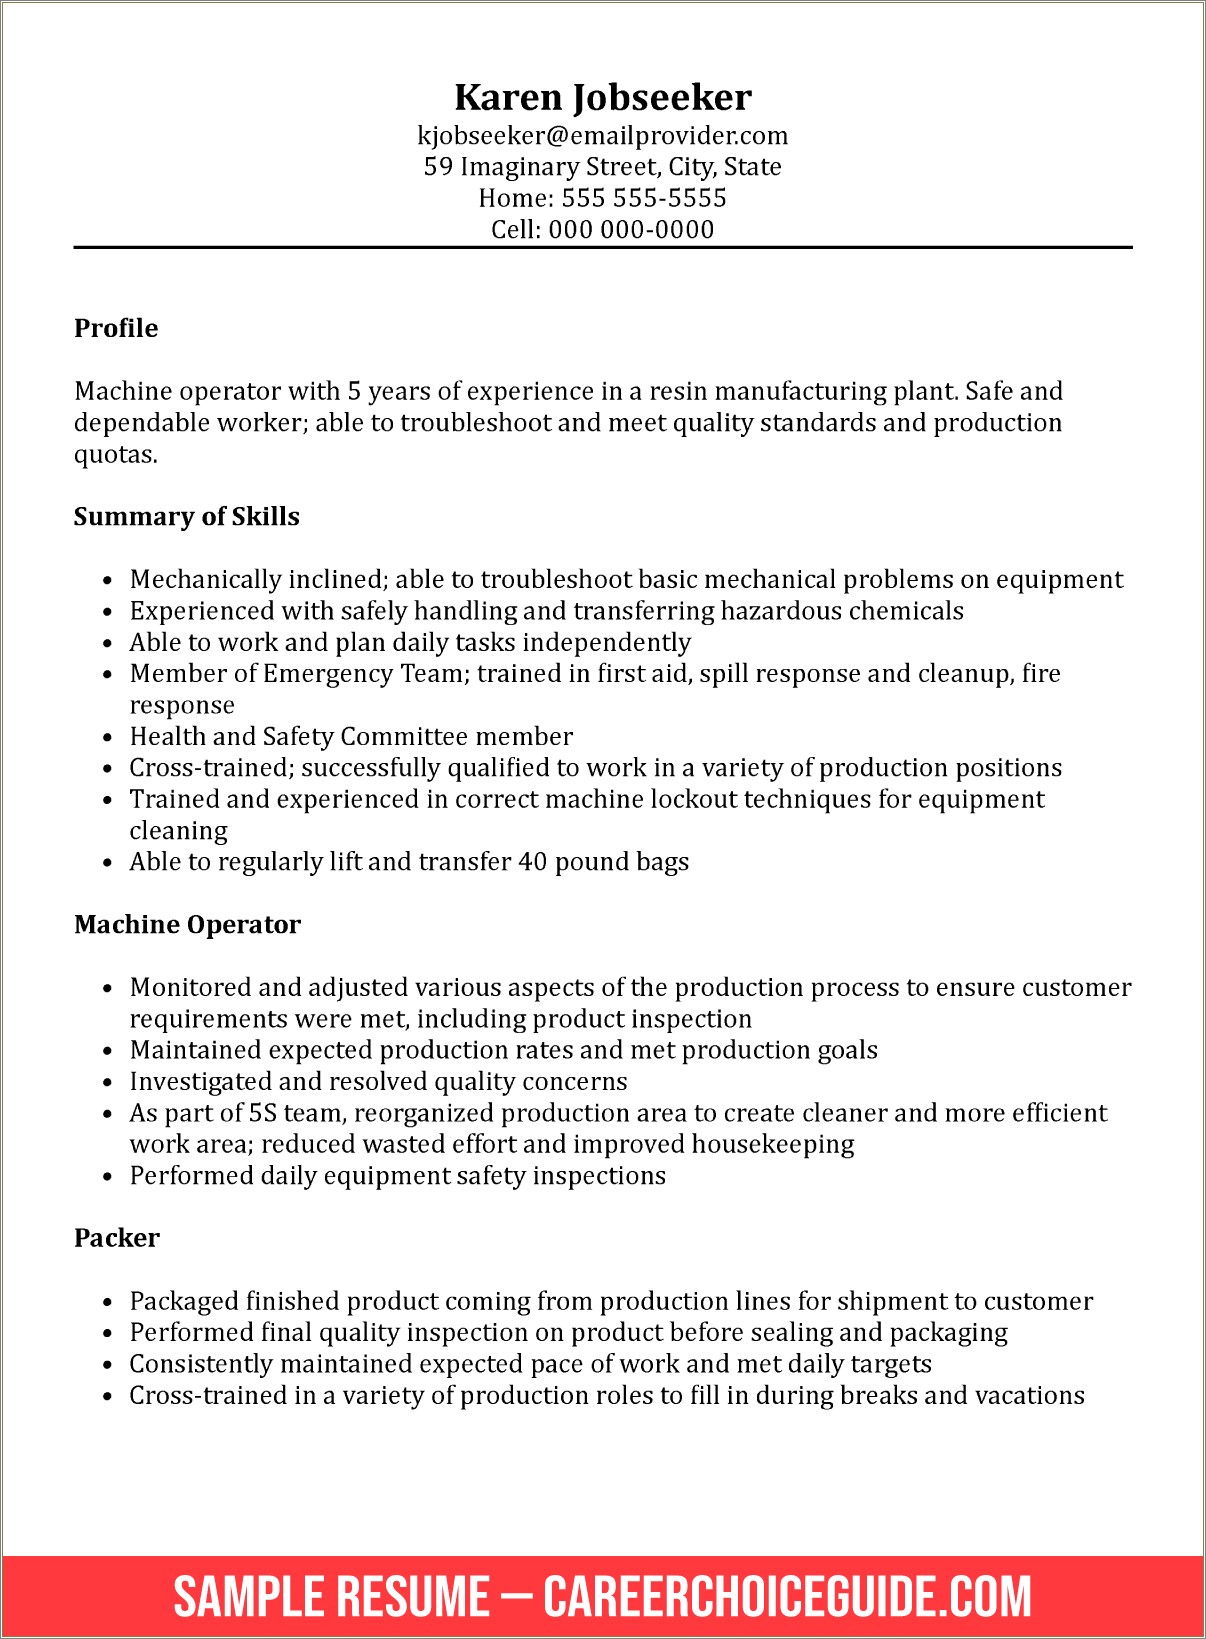 Sample Of A Good Production Resume